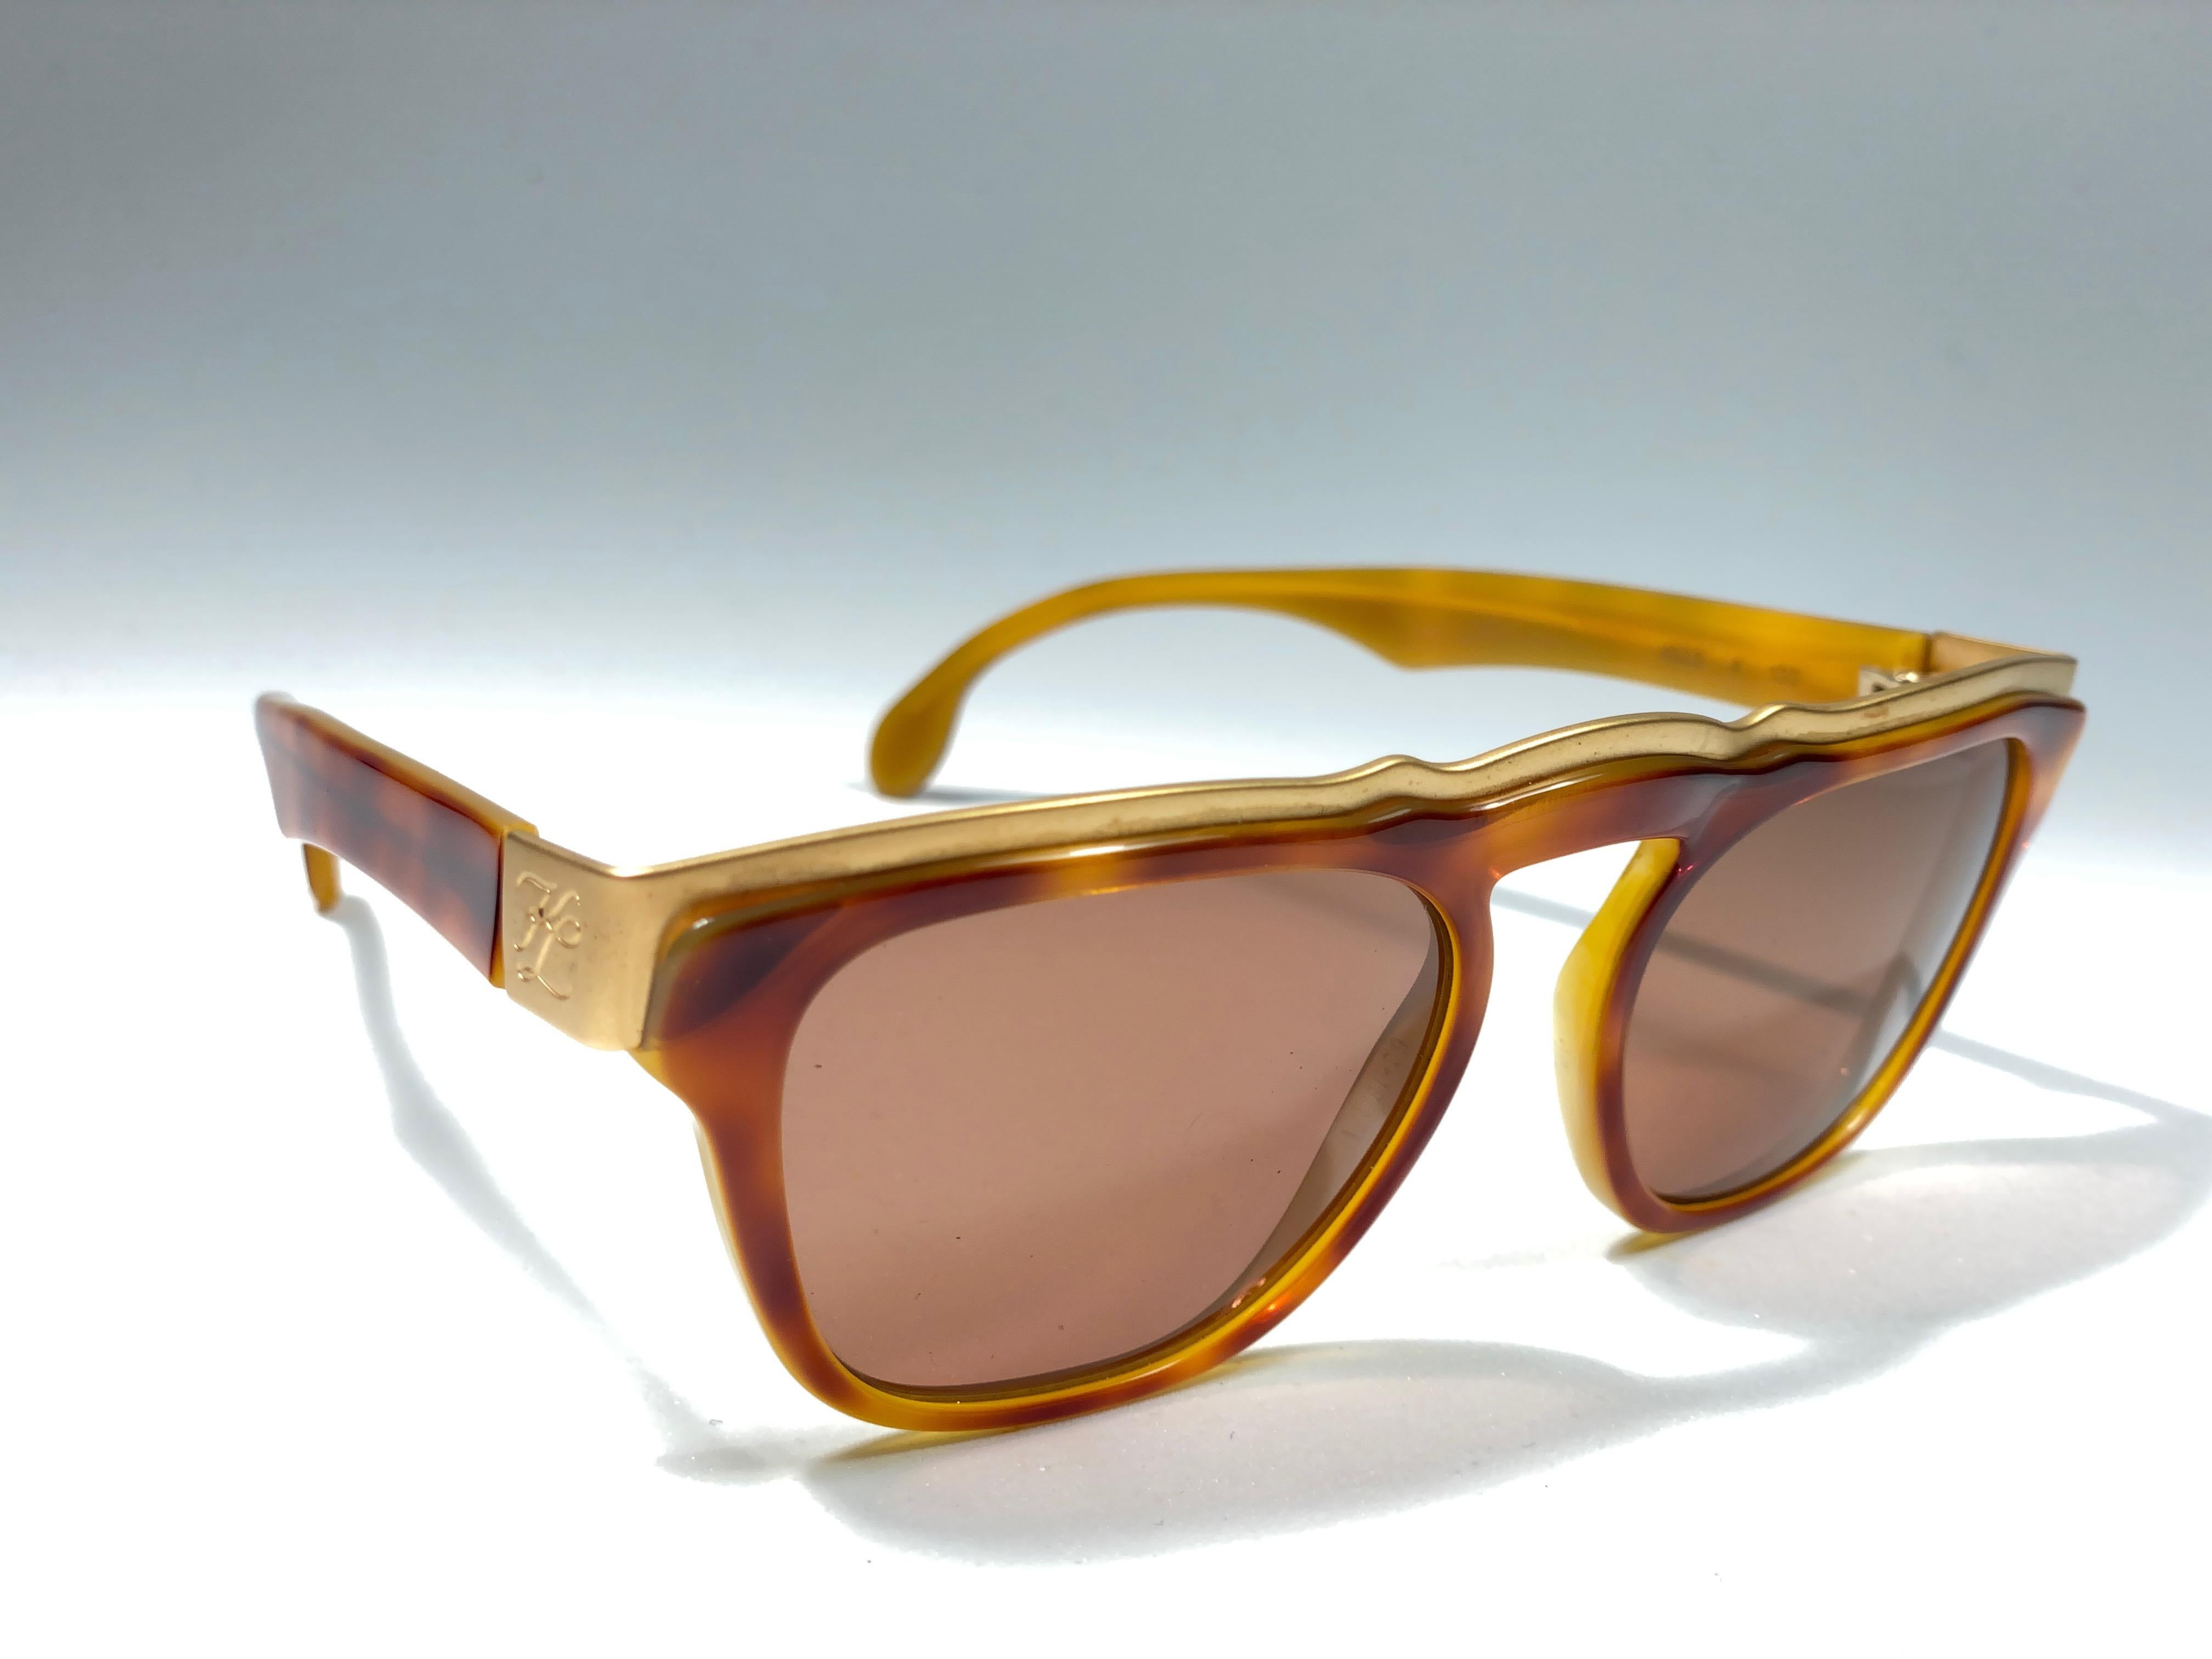 Amazing pair of New vintage 1980's Karl Lagerfeld gold & brown mosaic sunglasses framing a pair of amber lenses.
 
 New, never worn or displayed. This pair may show minor sign of wear due to storage. A true fashion statement .